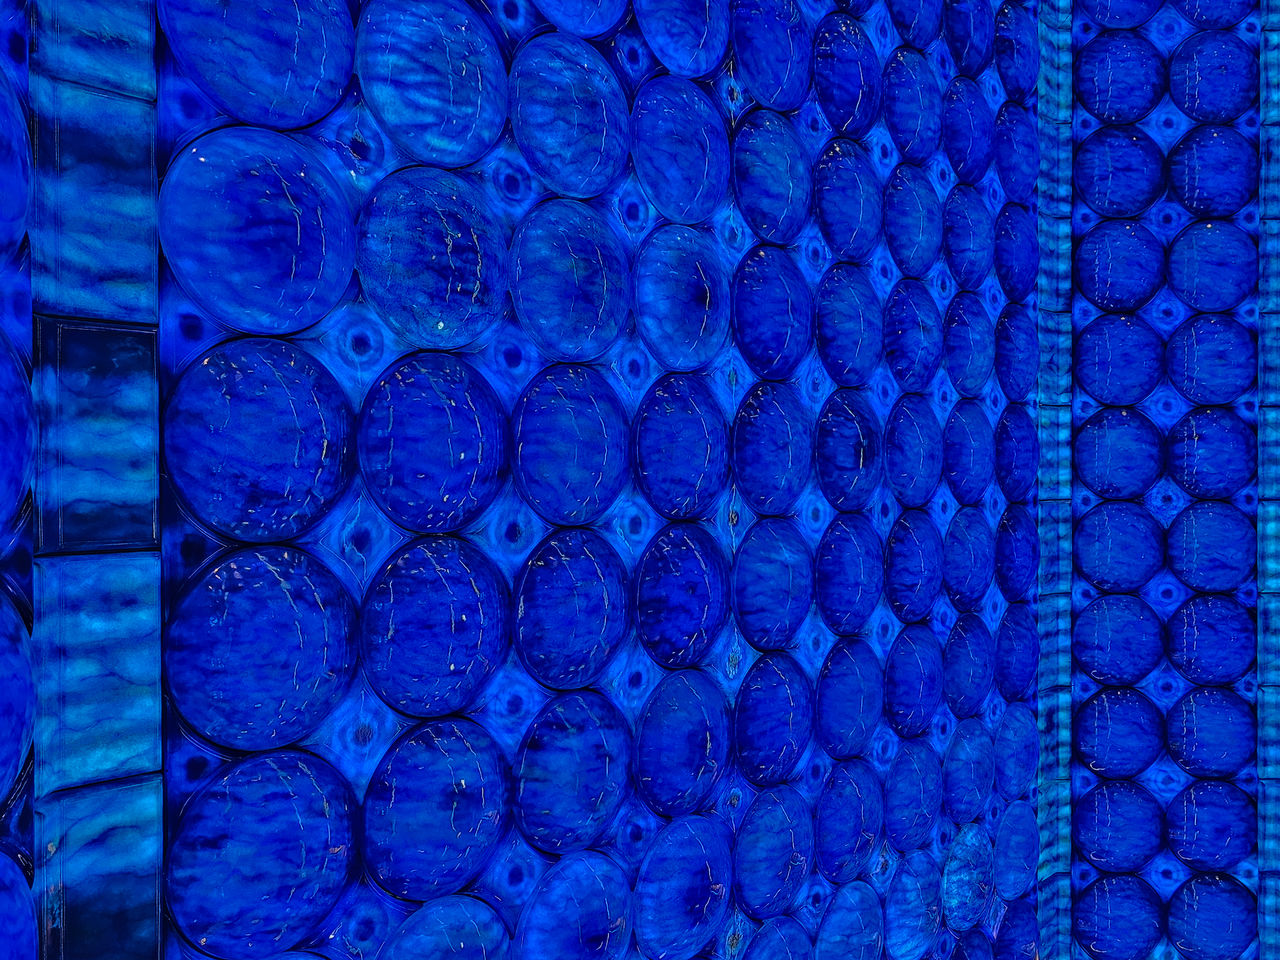 blue, backgrounds, azure, full frame, pattern, cobalt blue, circle, no people, purple, textured, close-up, geometric shape, abstract, shape, repetition, indoors, net, electric blue, line